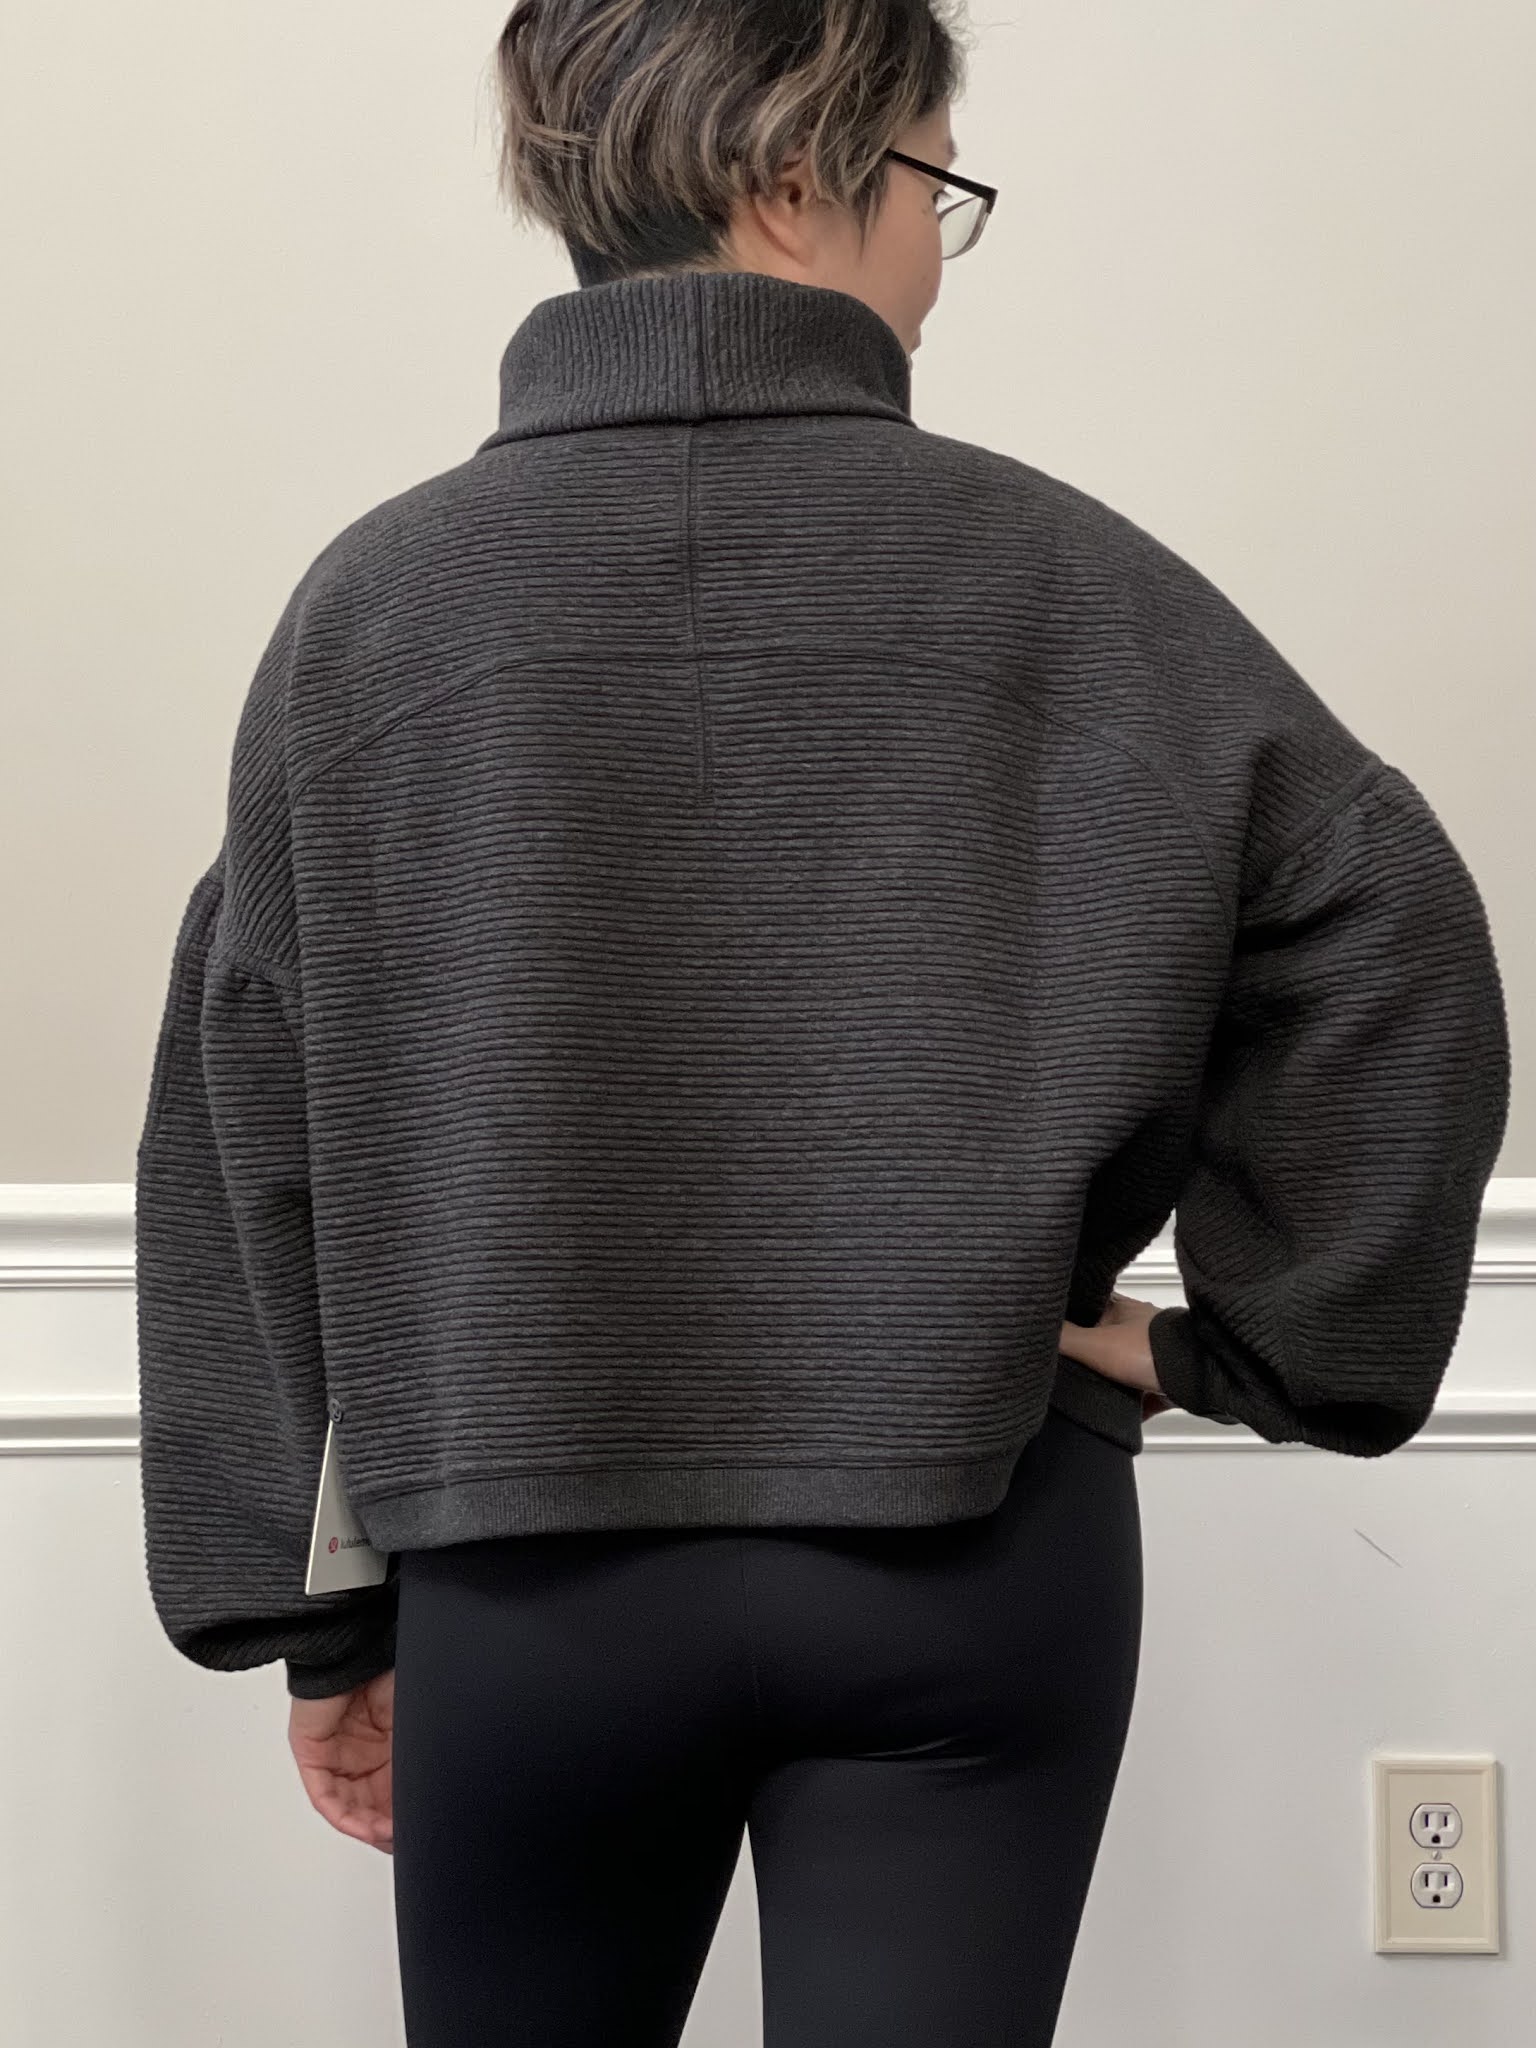 Fit Review Friday! Lululemon Scuba High Rise Cropped Jogger